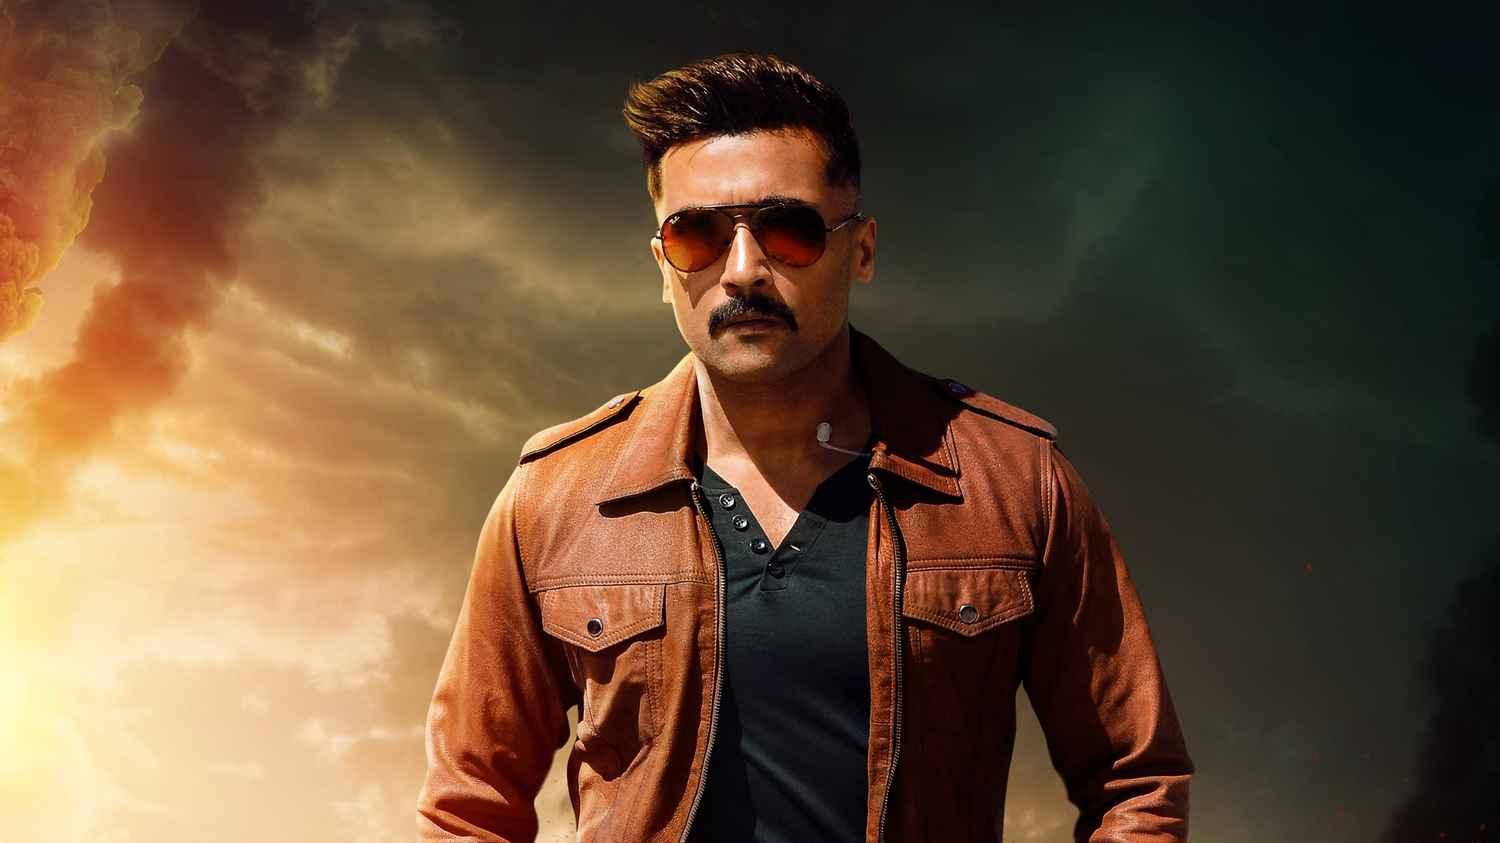 Last 20 years was about attaining the unachievable: Suriya